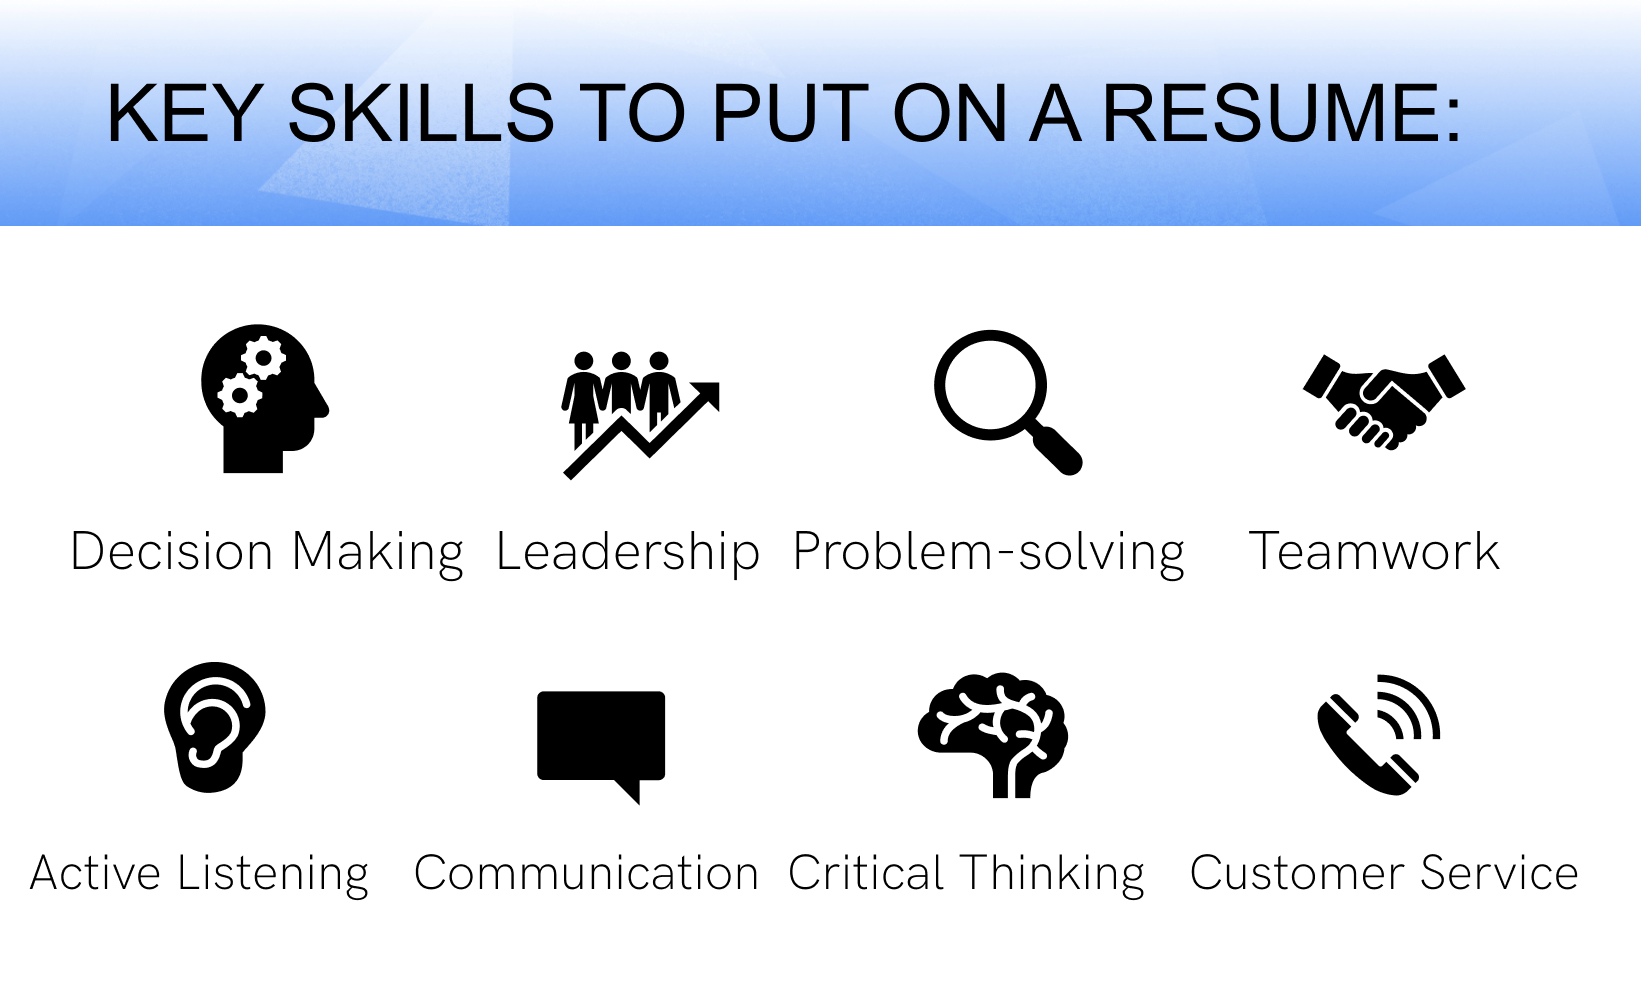 99 Key Skills for a Resume (Best List of Examples for All Jobs)